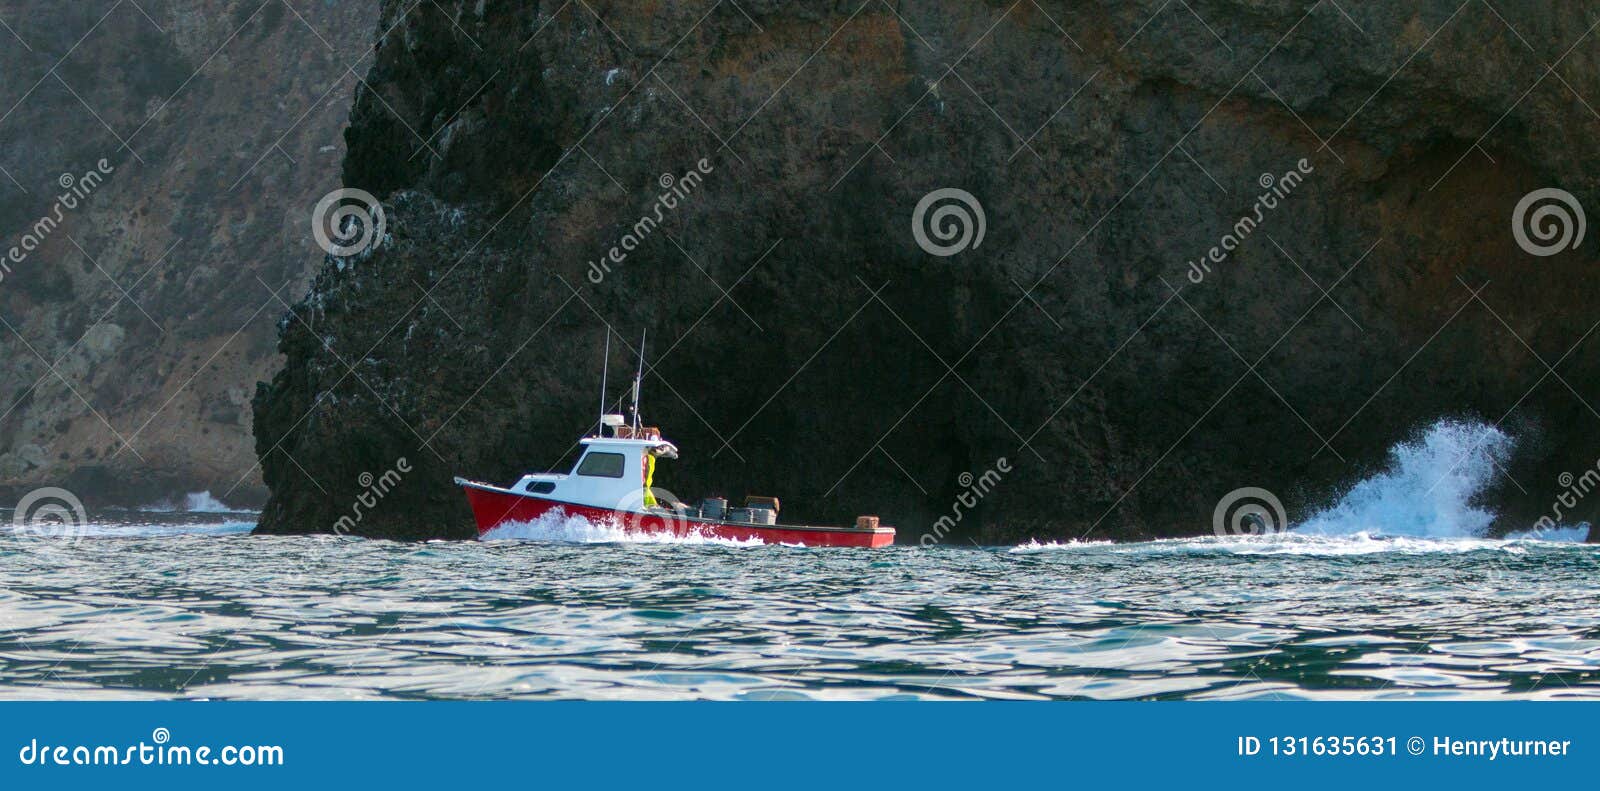 down east style lobster boat at coche point off the coast of santa cruz island in the channel islands off the california coast usa